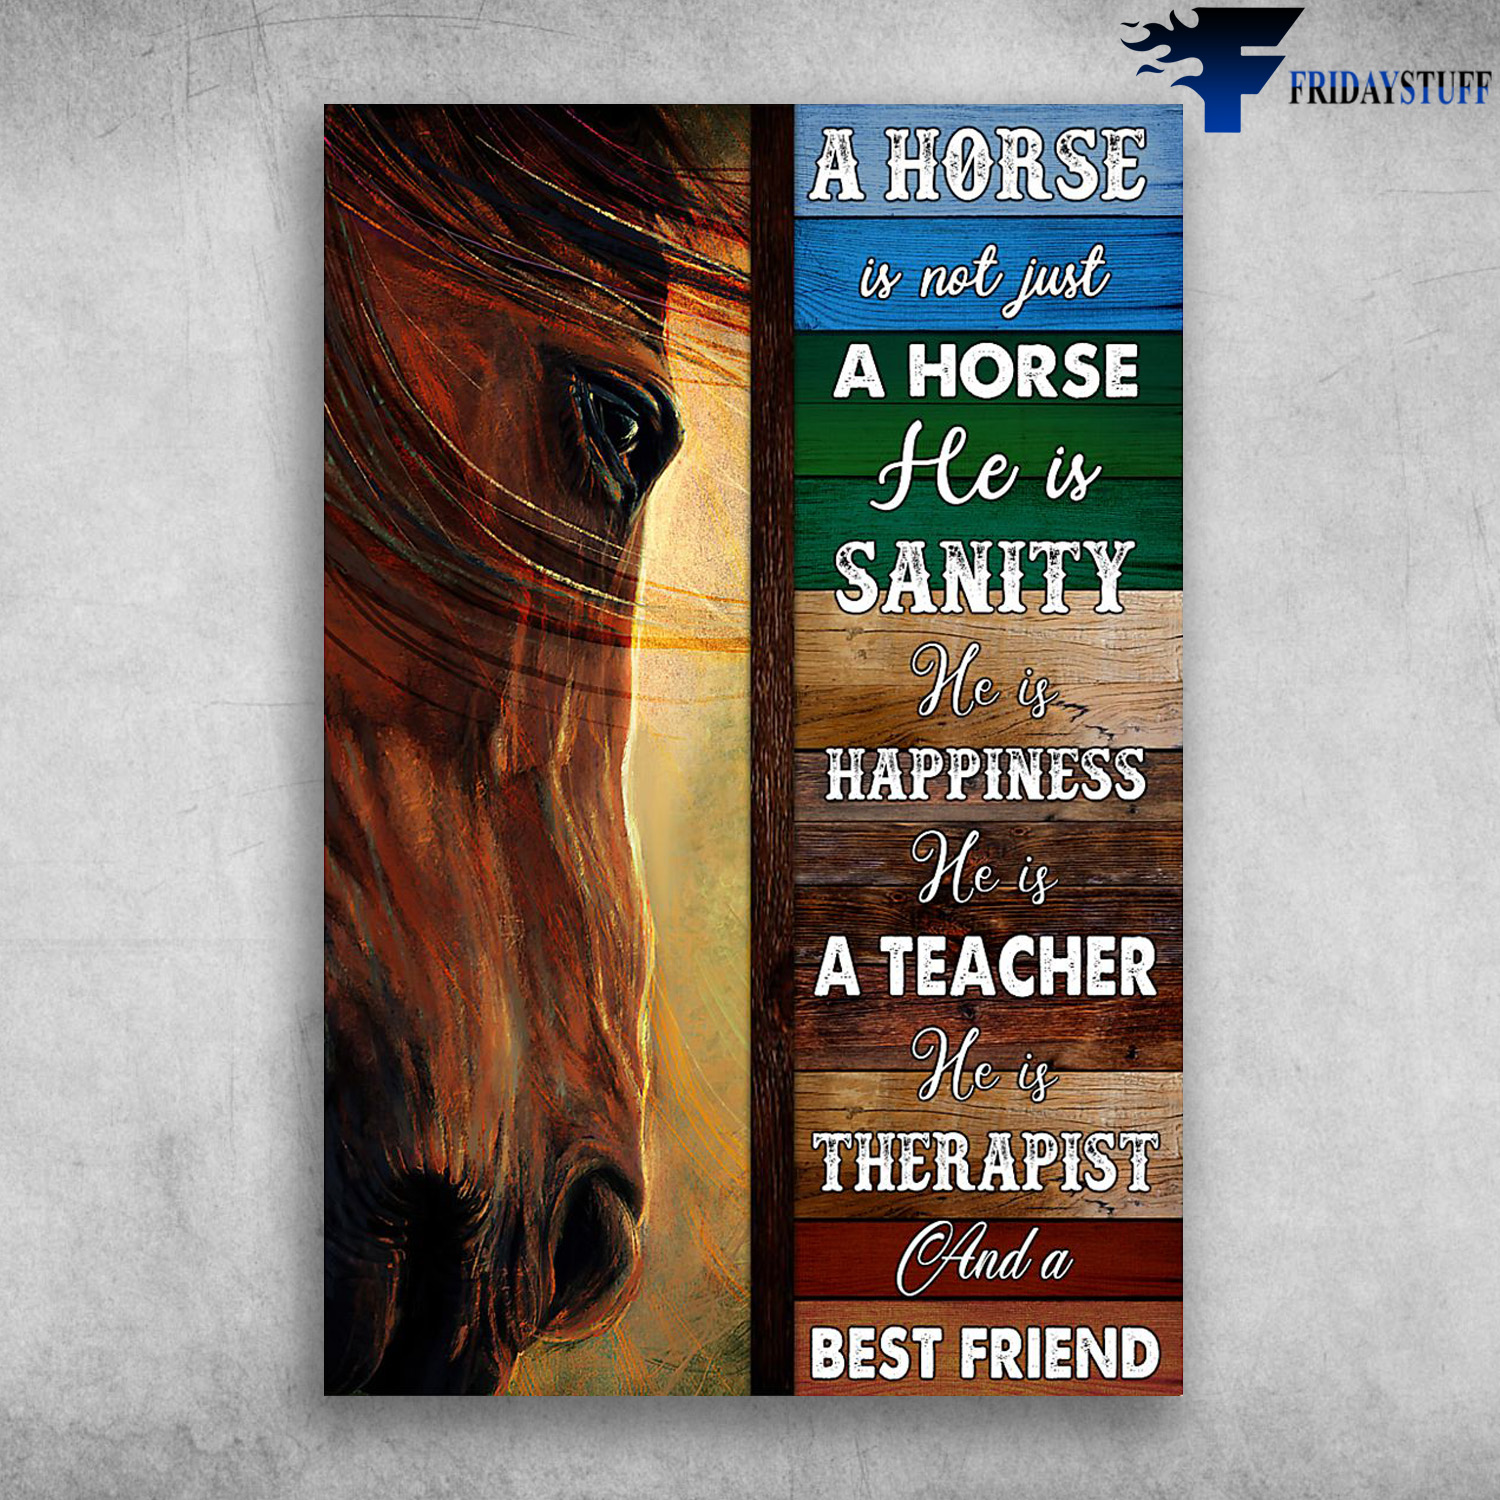 The Horse - A Horse Is Not Just A Horse, He Is Sanity, He Happiness, He Is A Teacher, He Is Therapist, And A Best Friend